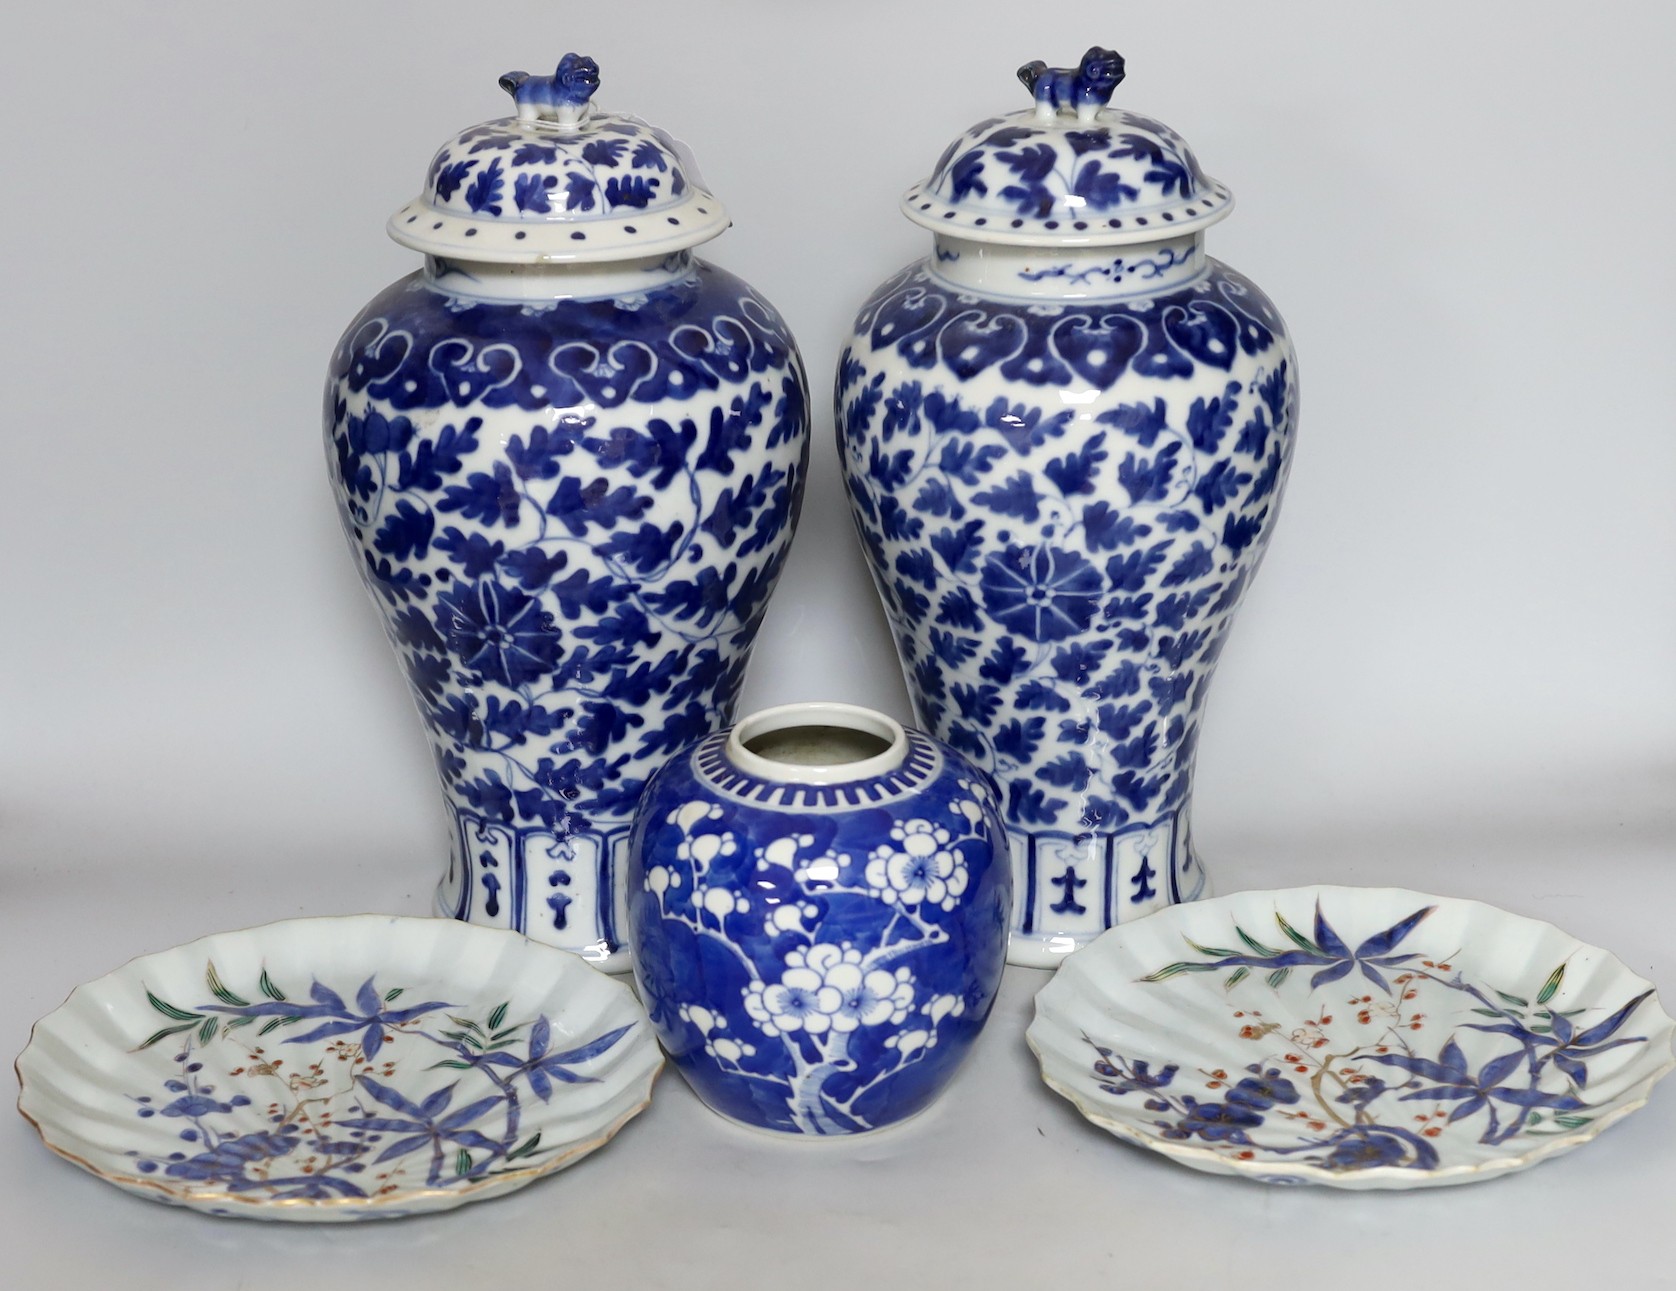 Two early 20th century Chinese blue and white vases with lion dog covers, together with a blue and